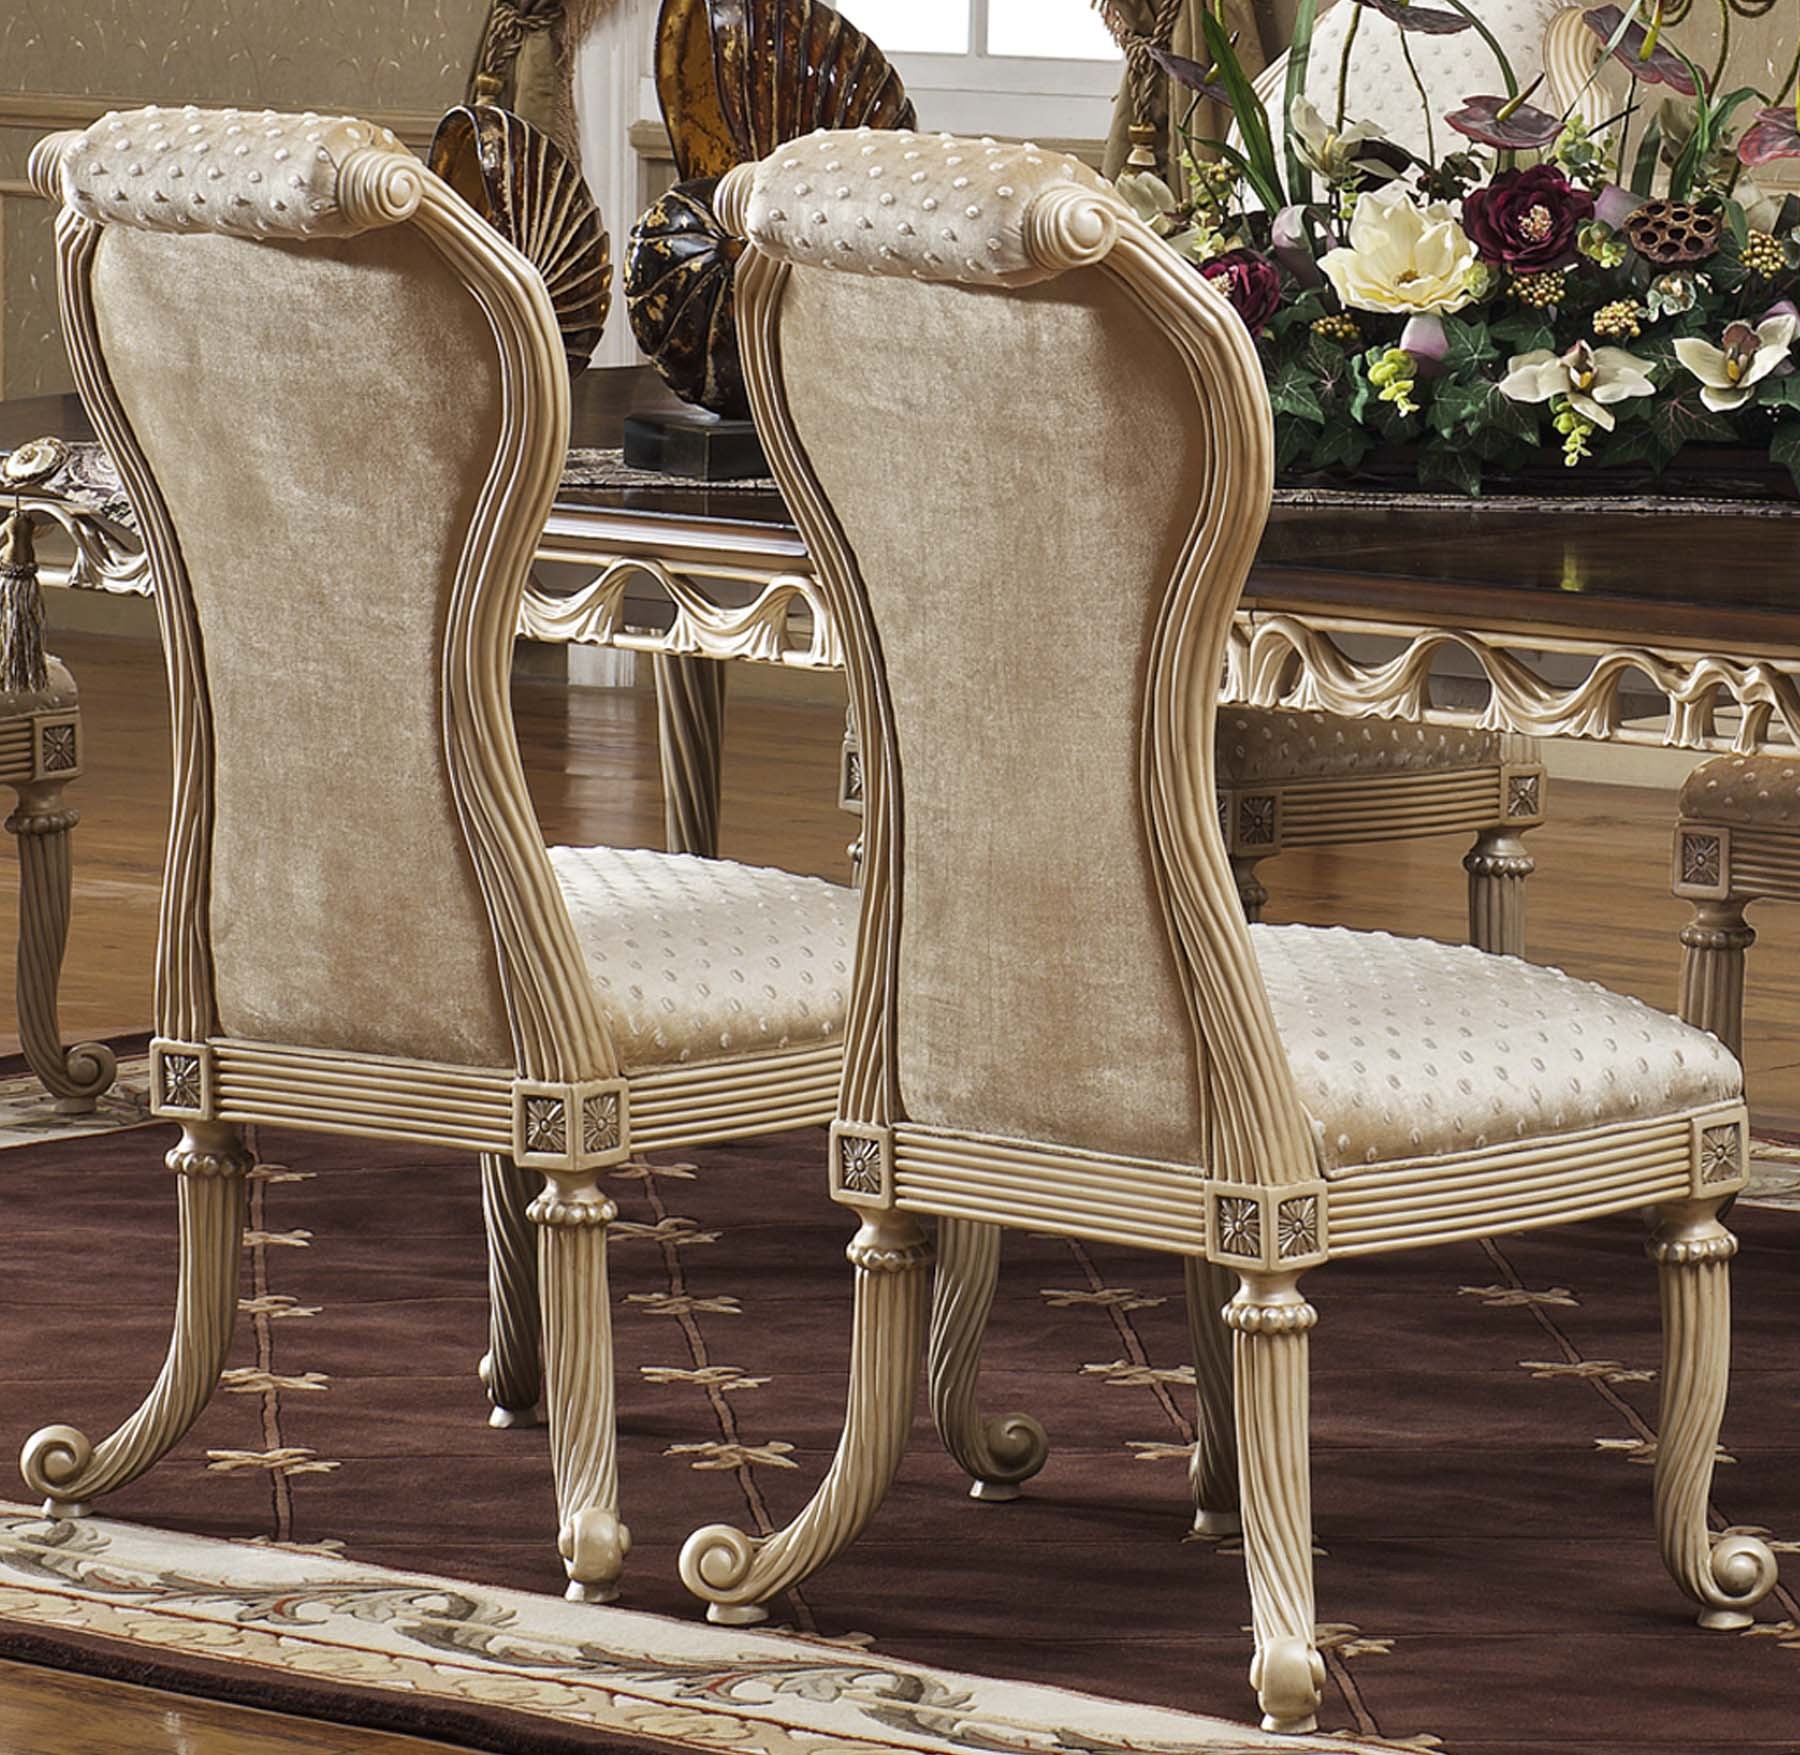 Casabella Chair shown in Egyptian Pearl